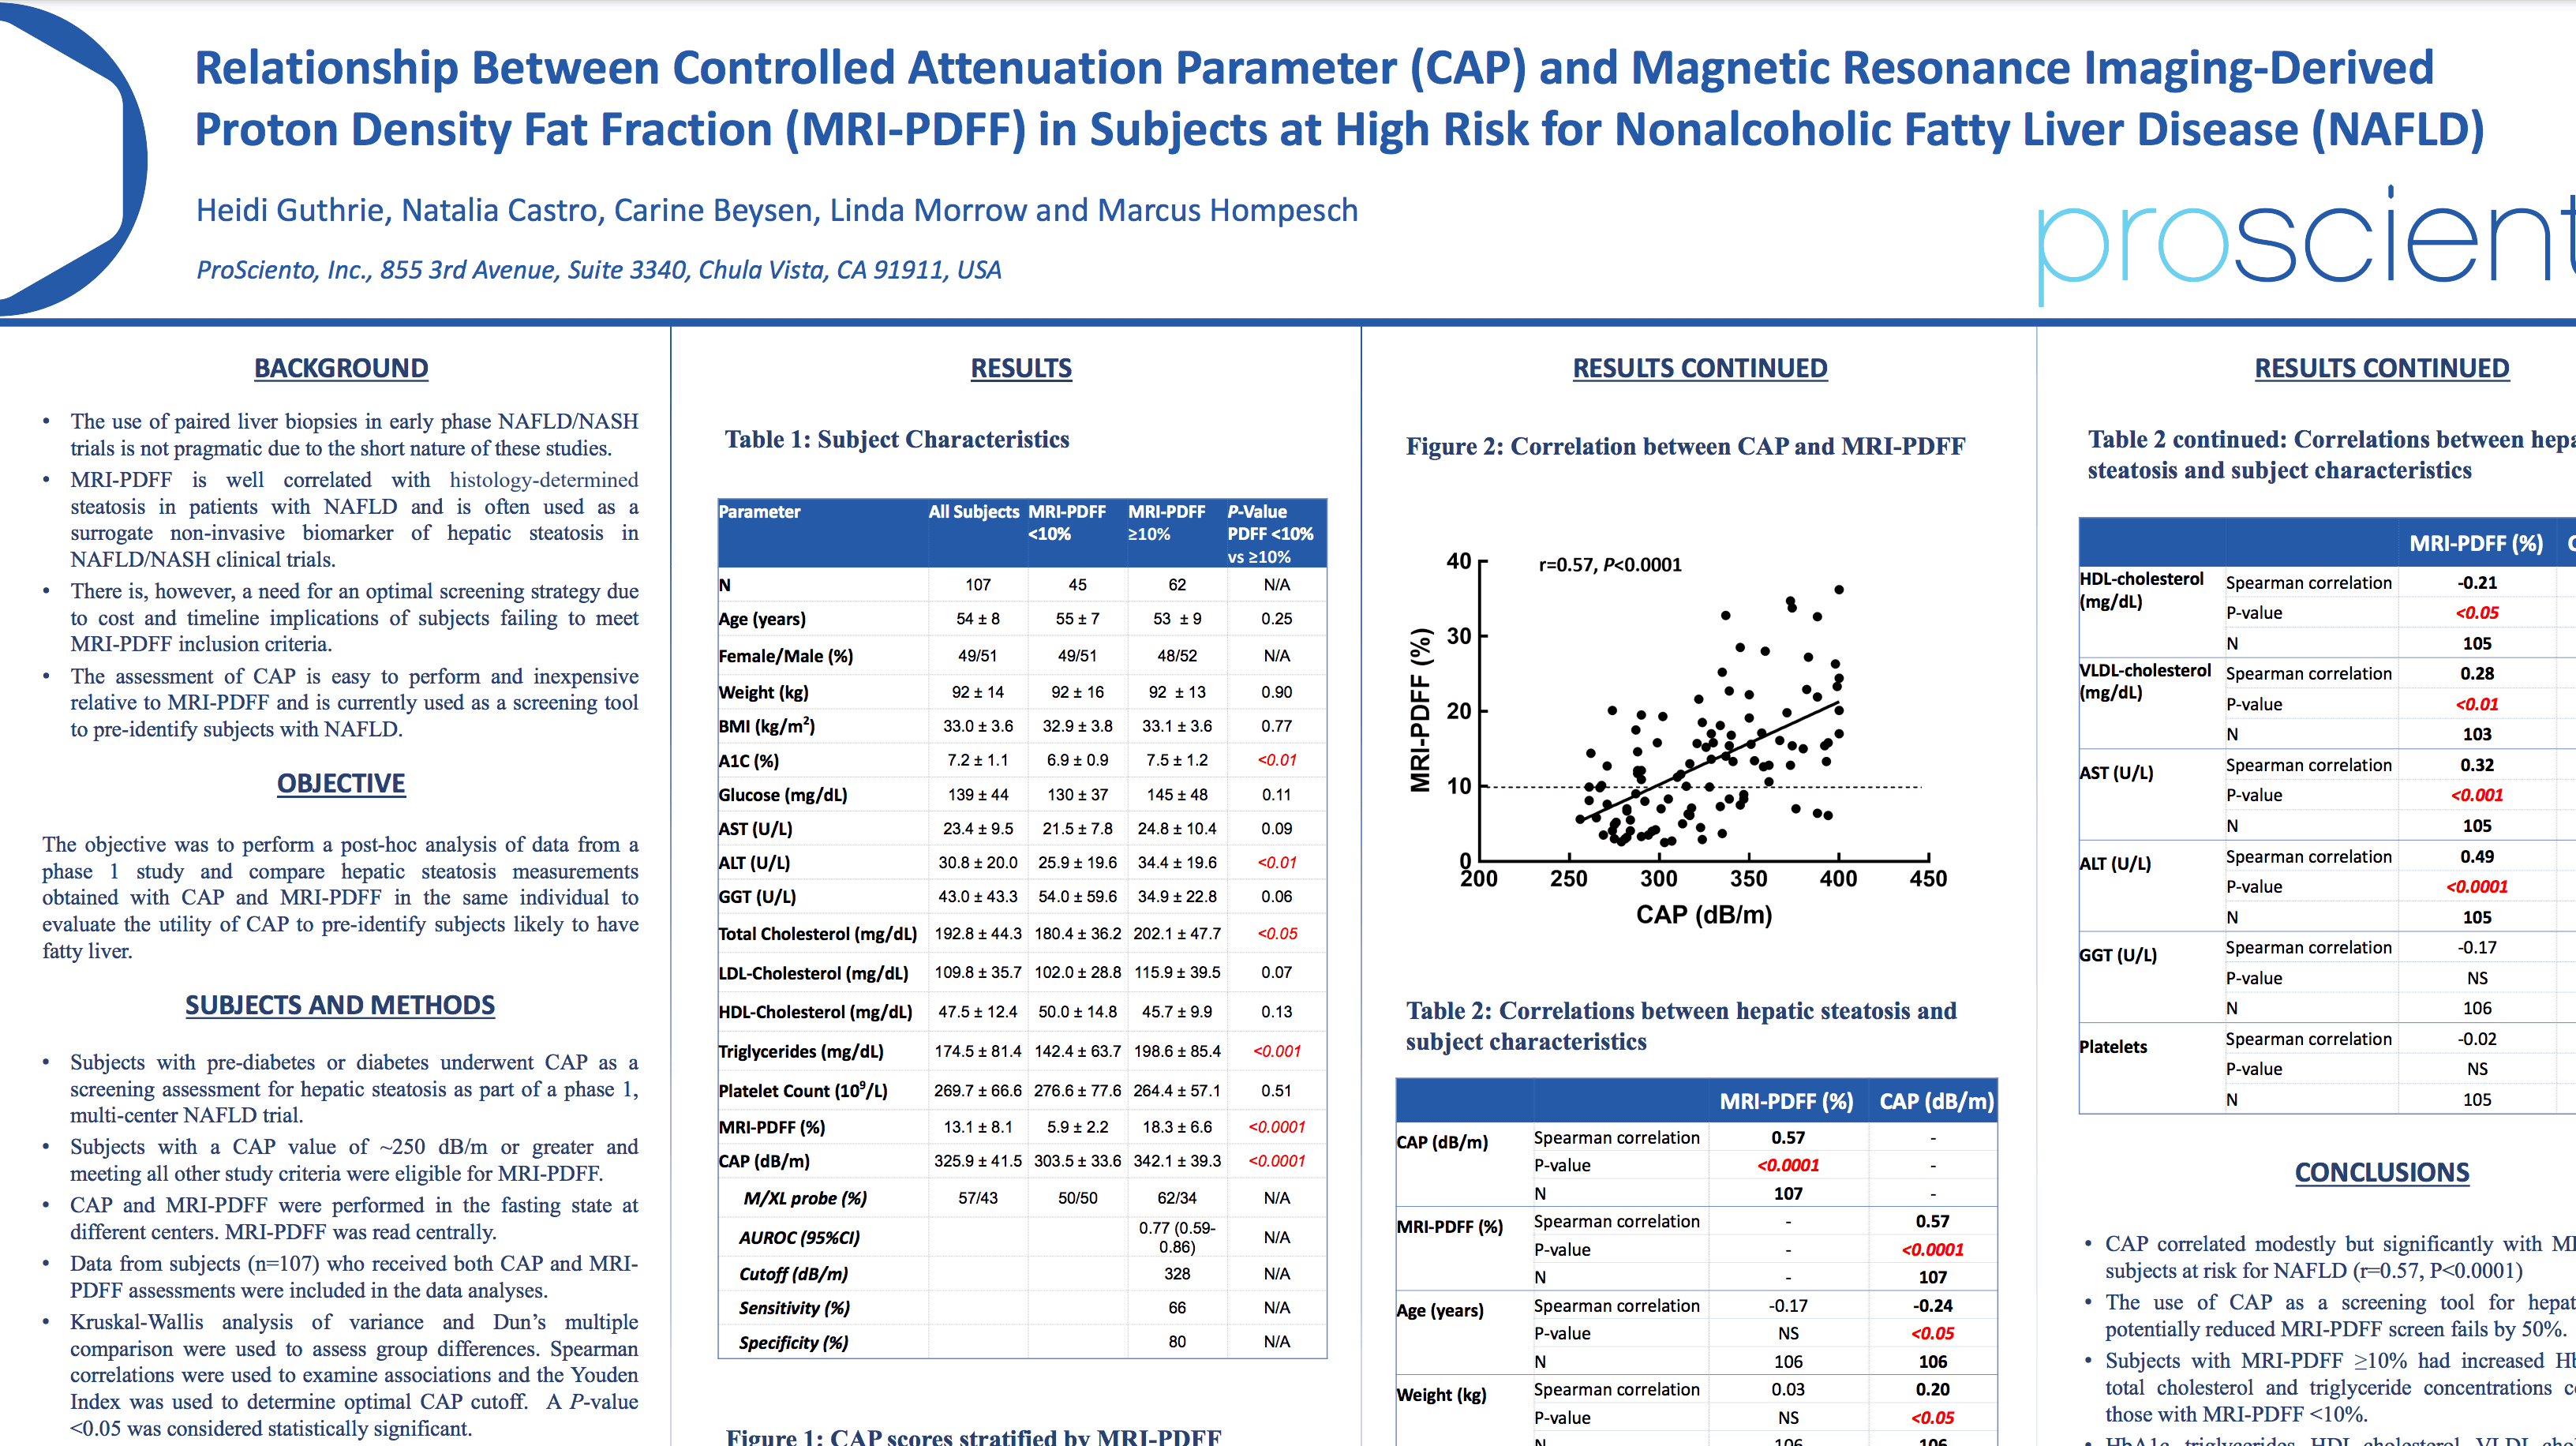 image of Relationship Between Controlled Attenuation Parameter (CAP) and Magnetic Resonance Imaging-Derived Proton Density Fat Fraction (MRI-PDFF) in Subjects at High Risk for Nonalcoholic Fatty Liver Disease (NAFLD)